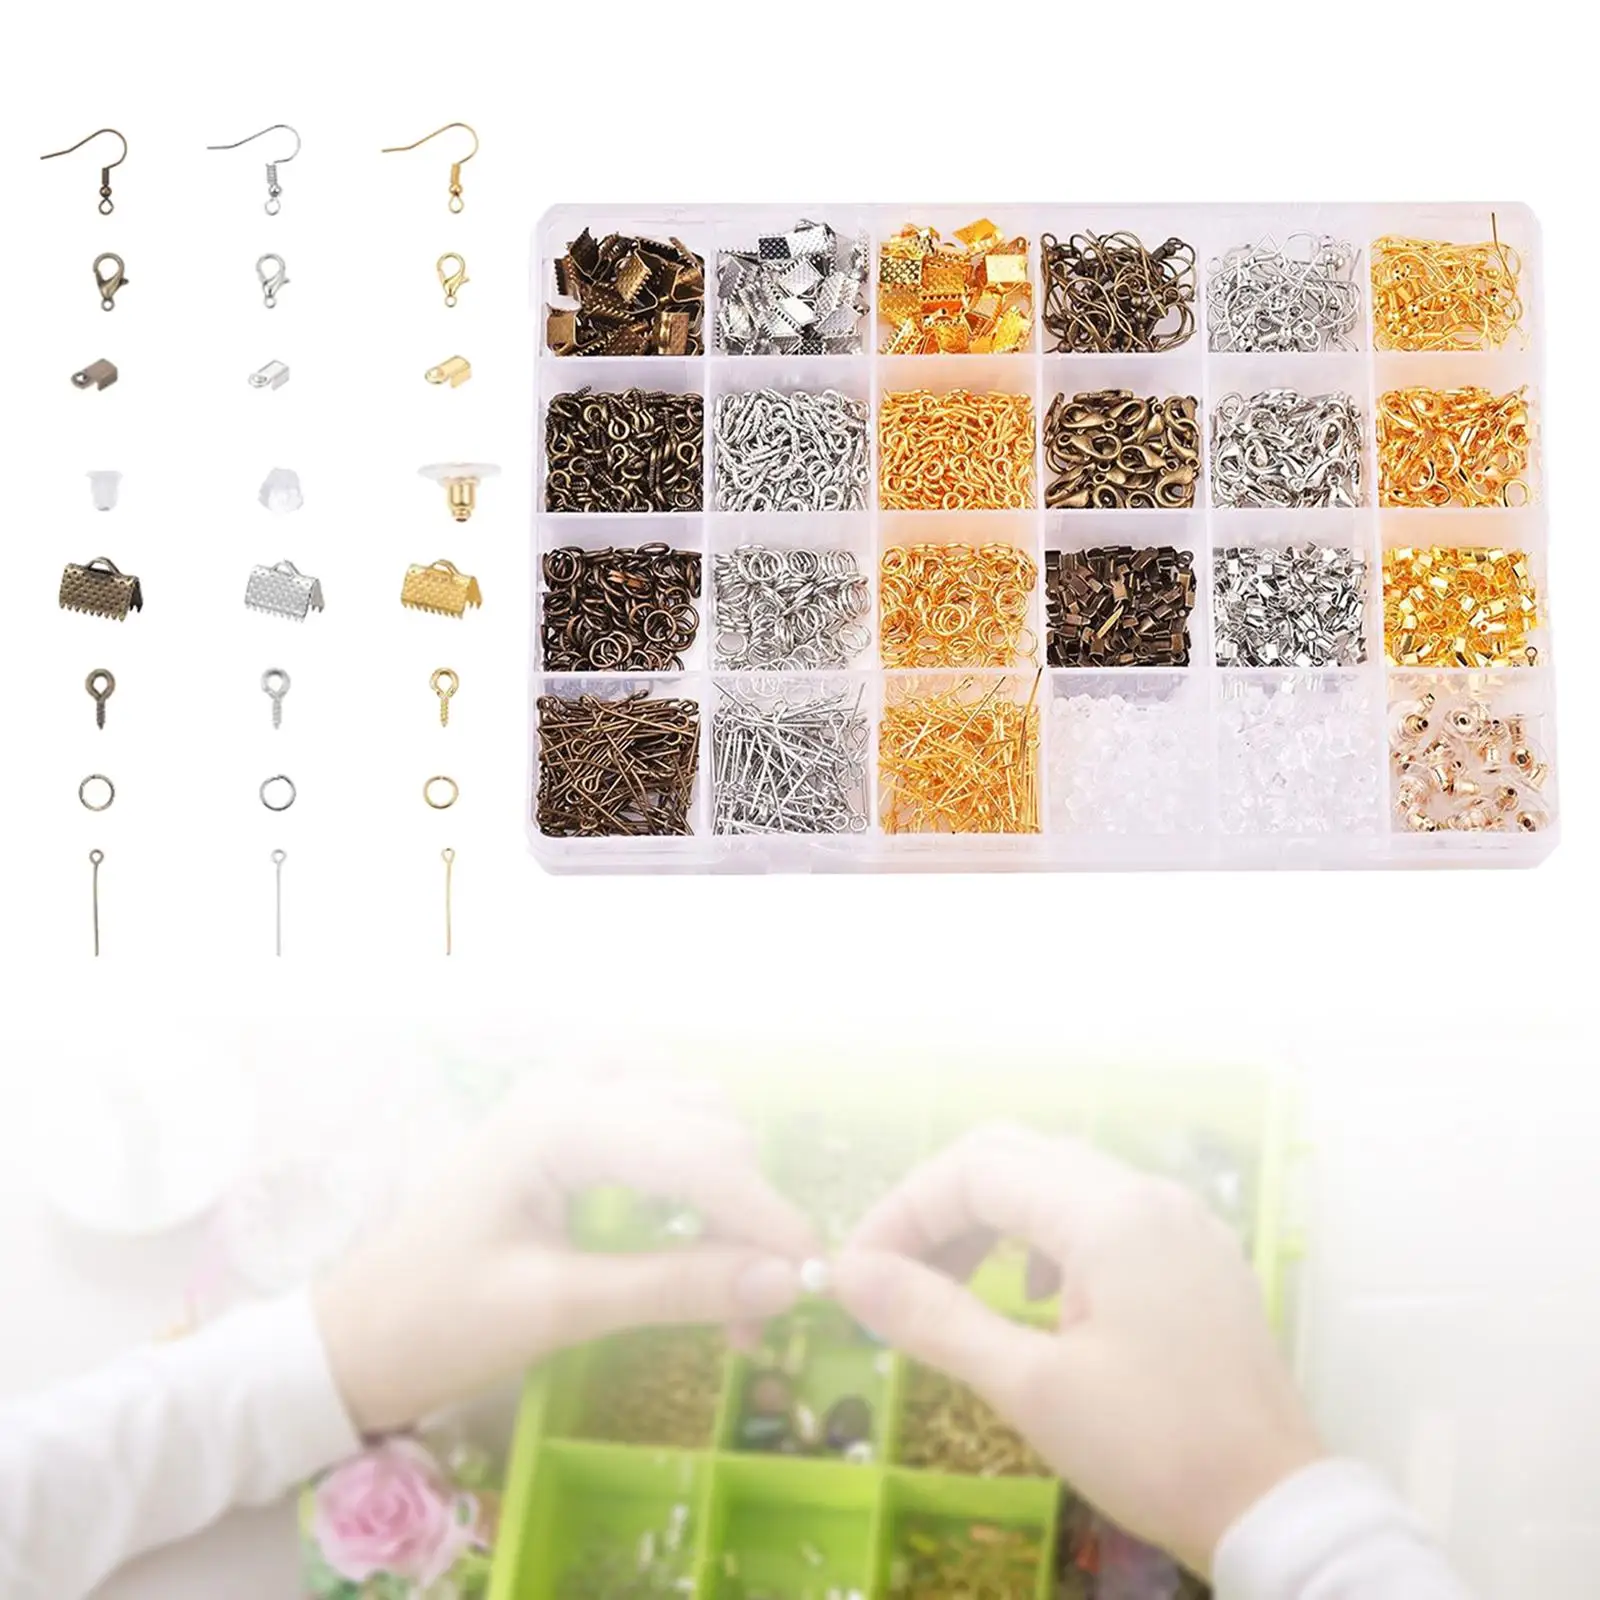 1700Pcs Earring Making Supplies Kit Earring Backs Lobster Clasps Earring Finding for DIY Necklace Jewelry Making Repairing